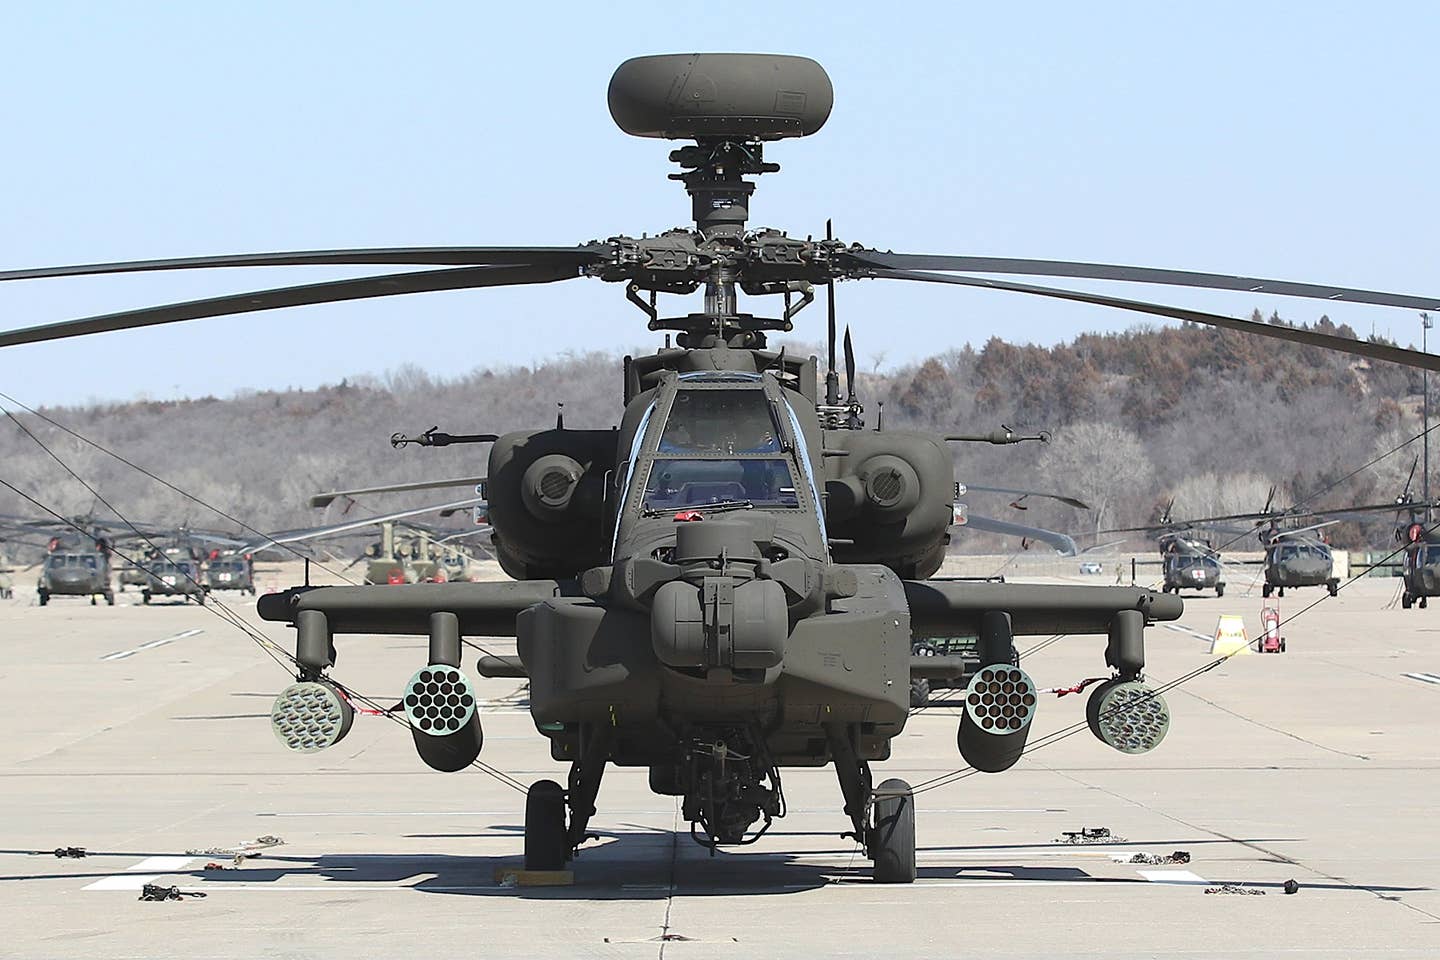 A more typical Hydra launch platform, a US Army AH-64E Apache attack helicopter with four M261 rocket pods under its stub wings. <em>US Army</em>